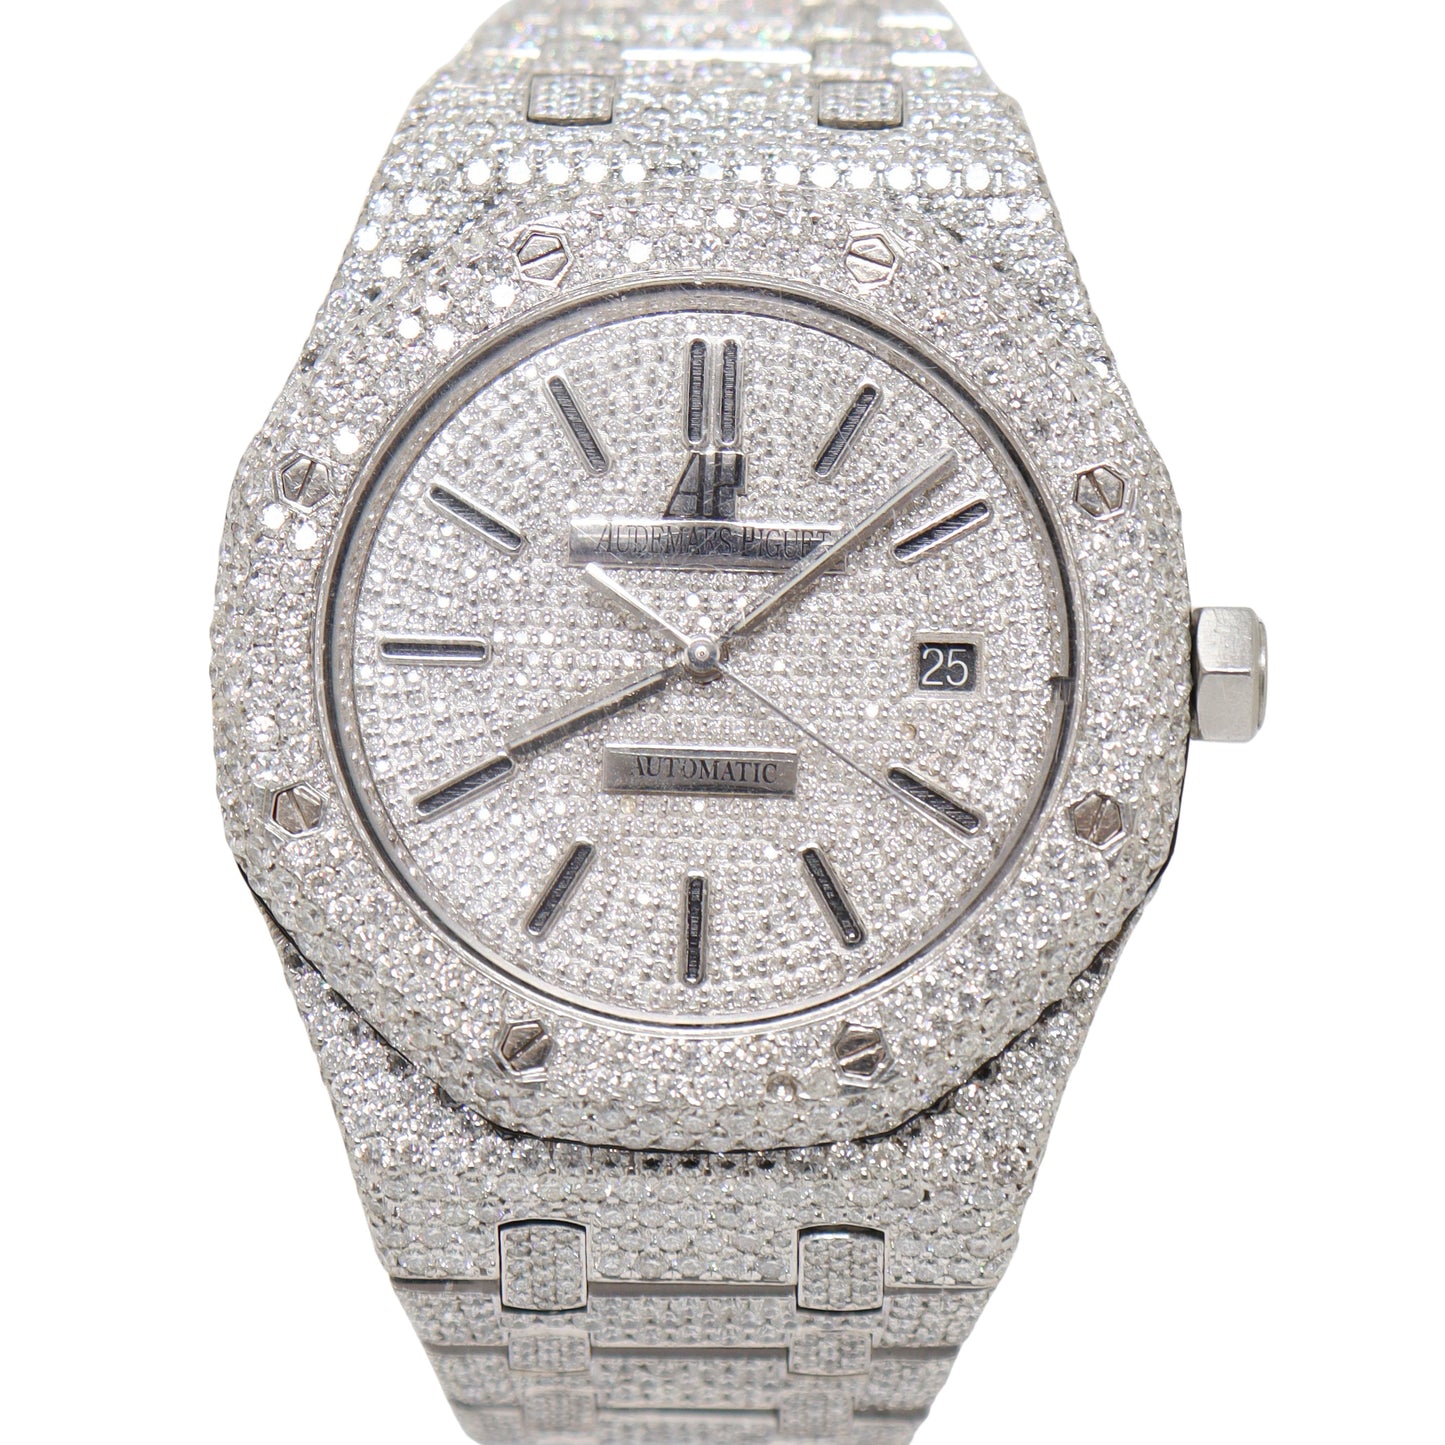 Audemars Piguet Royal Oak 41mm ICED OUT Stainless Steel Pave Diamond Dial Watch - Happy Jewelers Fine Jewelry Lifetime Warranty